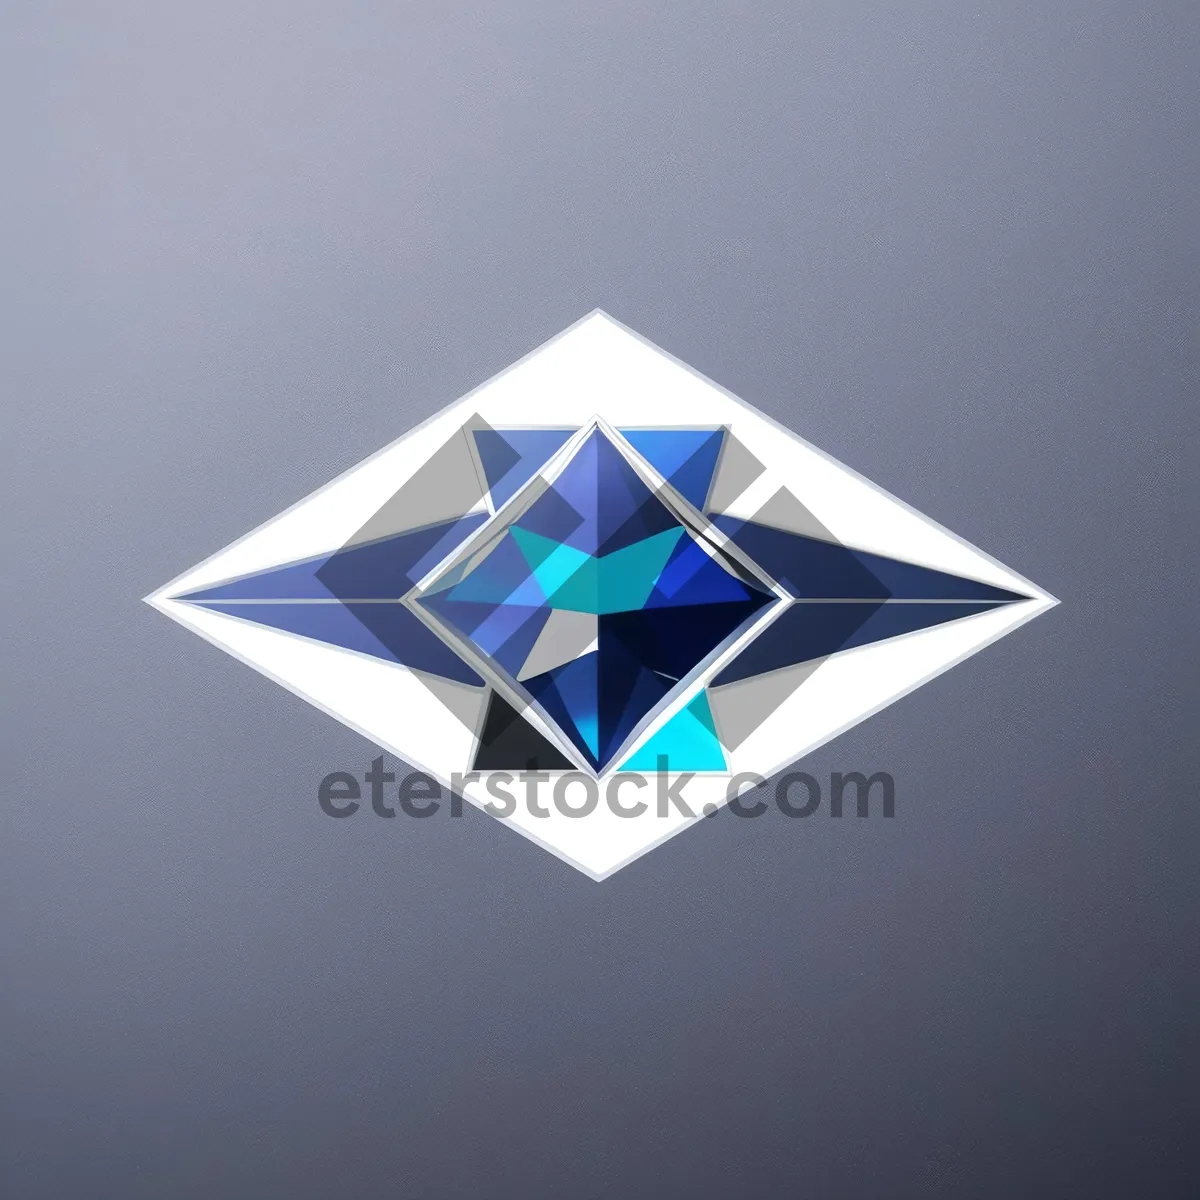 Picture of Star Symbol in 3D Glass Design